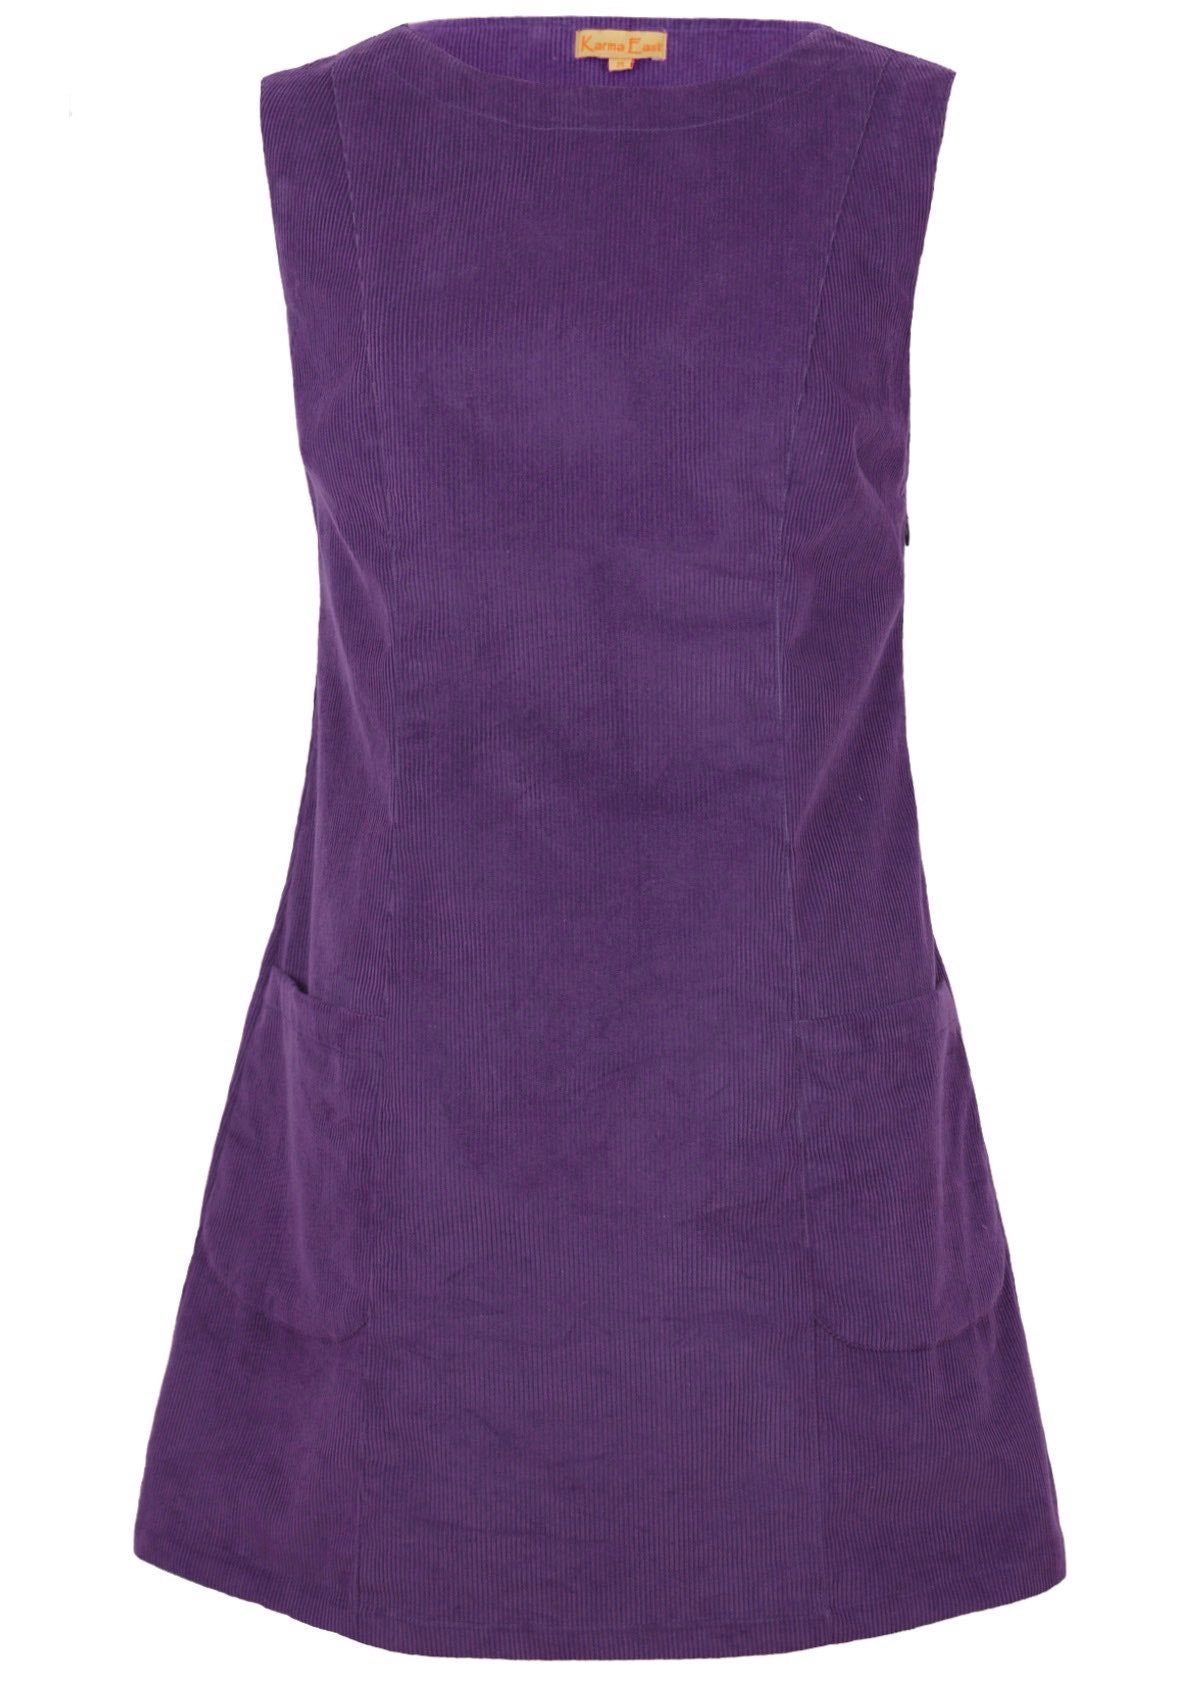 Parachute Purple Tunic features a fitted bodice and is 100% cotton corduroy. 